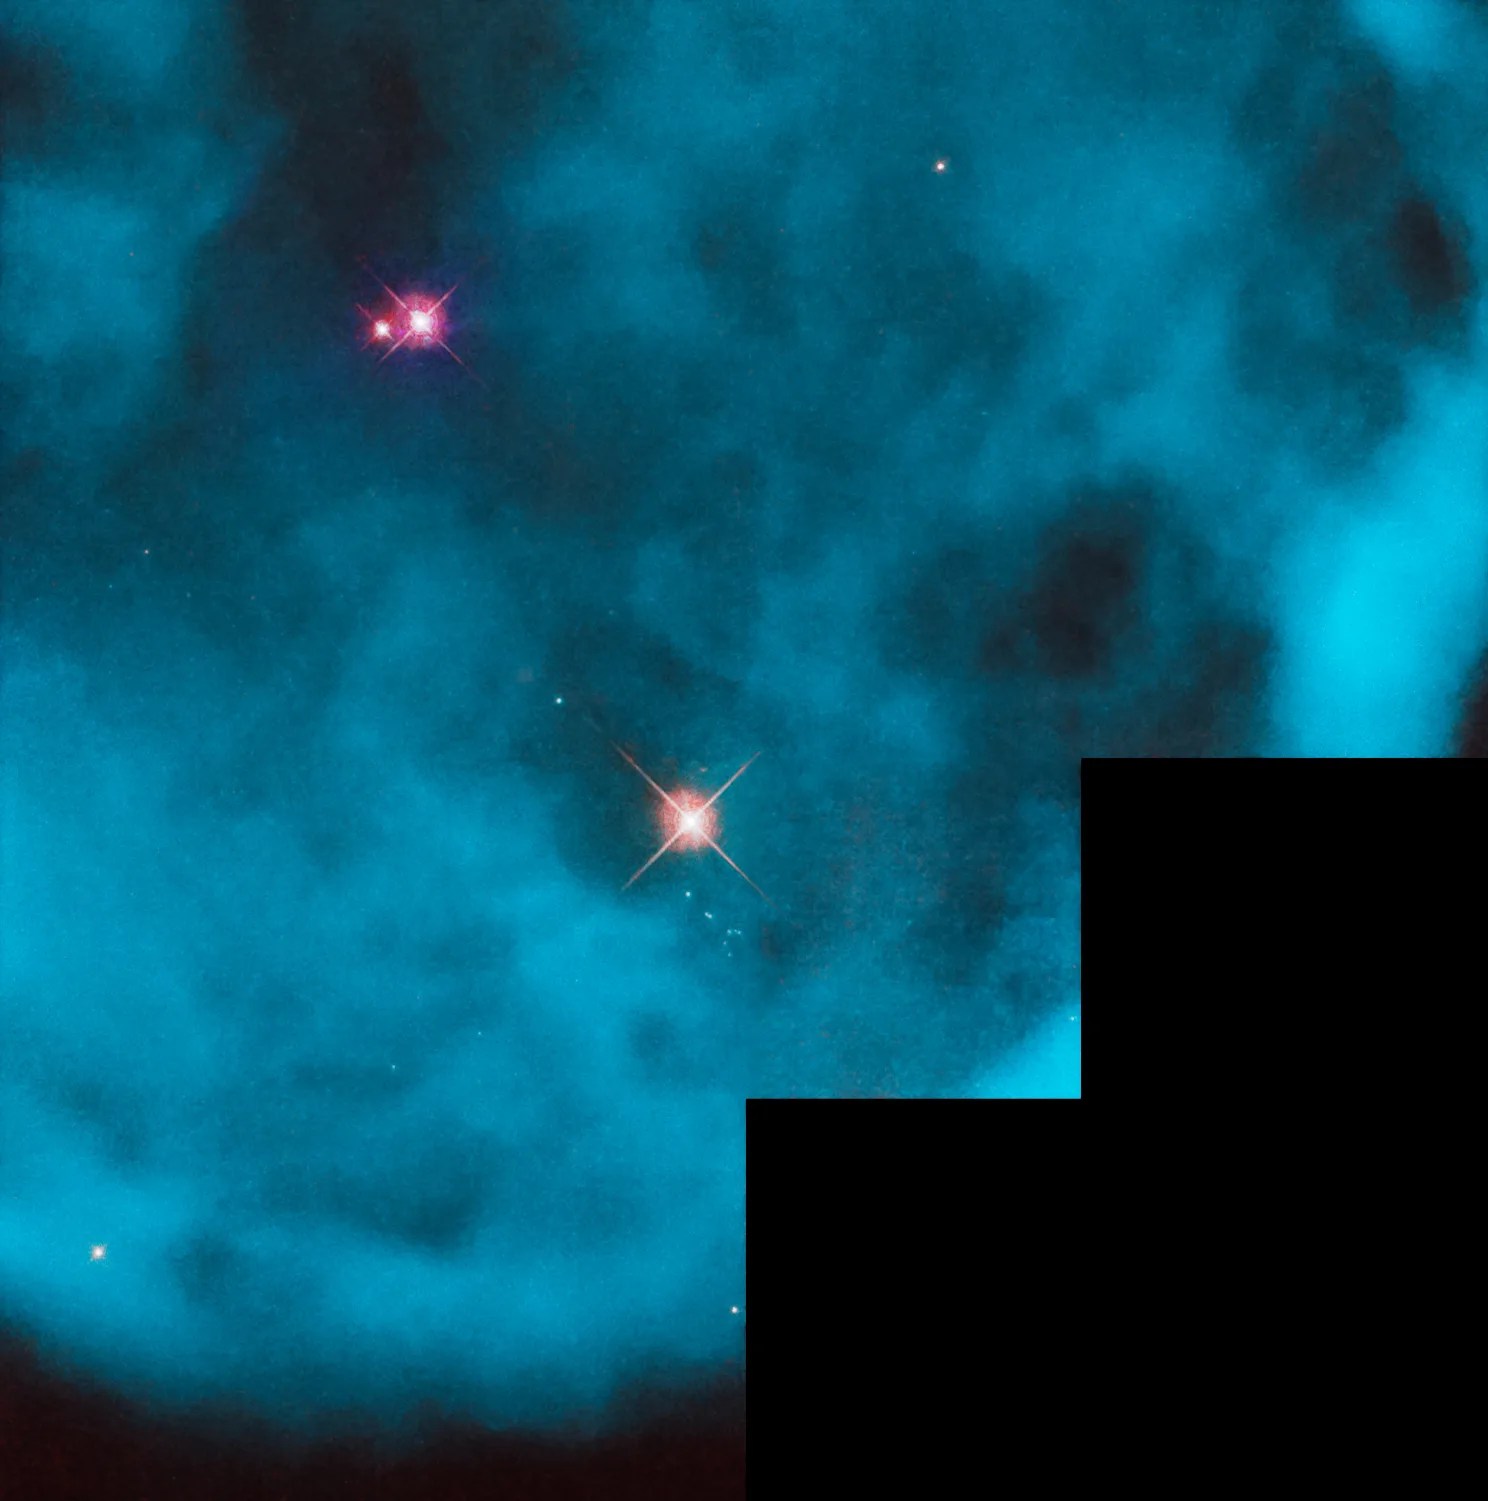 Near the center of the image is a bright orange star, and in the upper left, are two reddish-pink stars near each other. The entire image is filled by a turquoise, cloud-like "bubble".